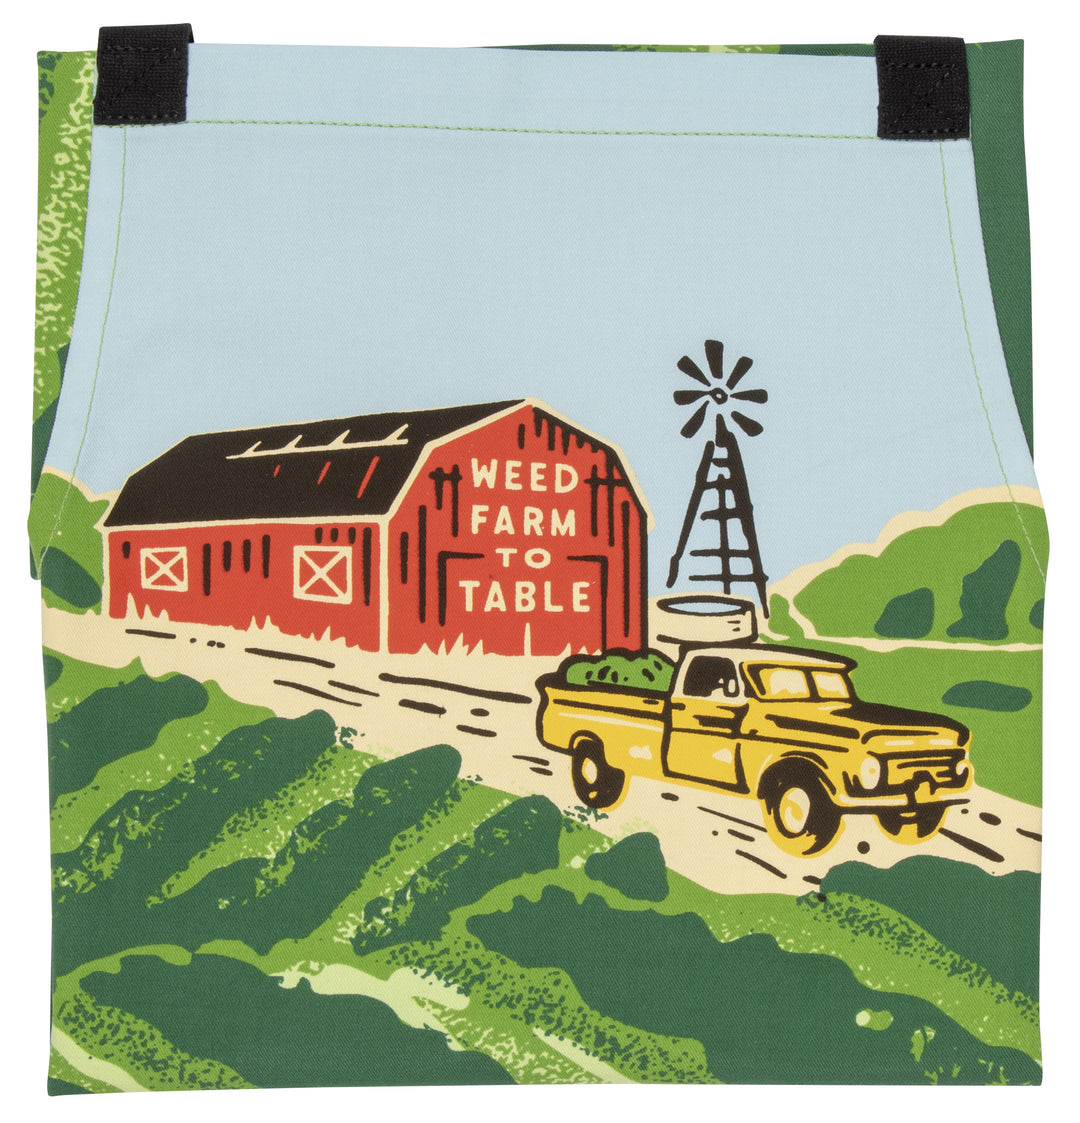 Blue Q Weed Farm To Table Apron